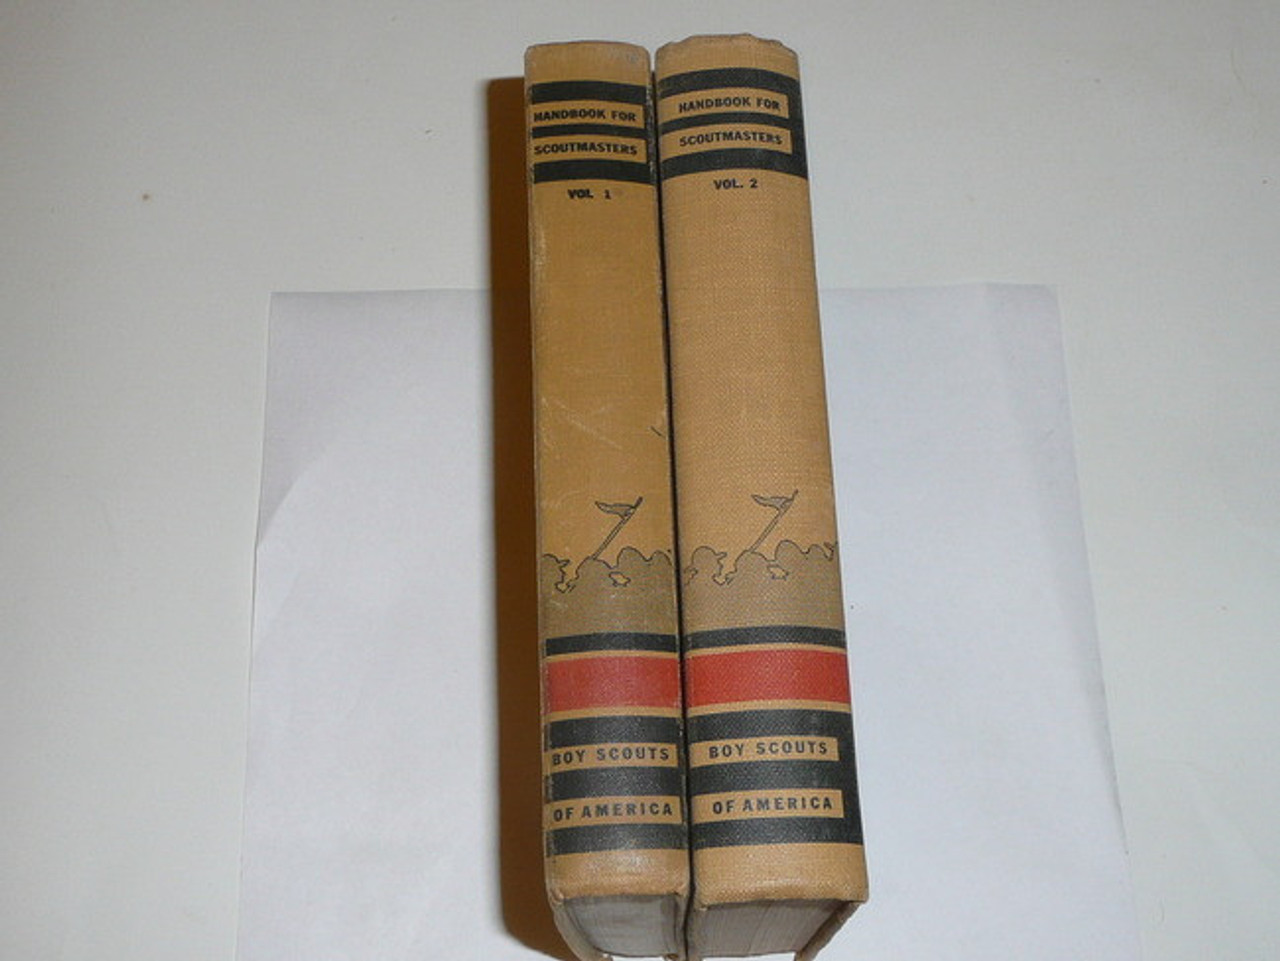 1938 Handbook For Scoutmasters, Third Edition, RARE Matched Pair, Vol 1 is Fourth printing (10-38) & Vol 2 is Third printing (12-38), Both in MINT Condition